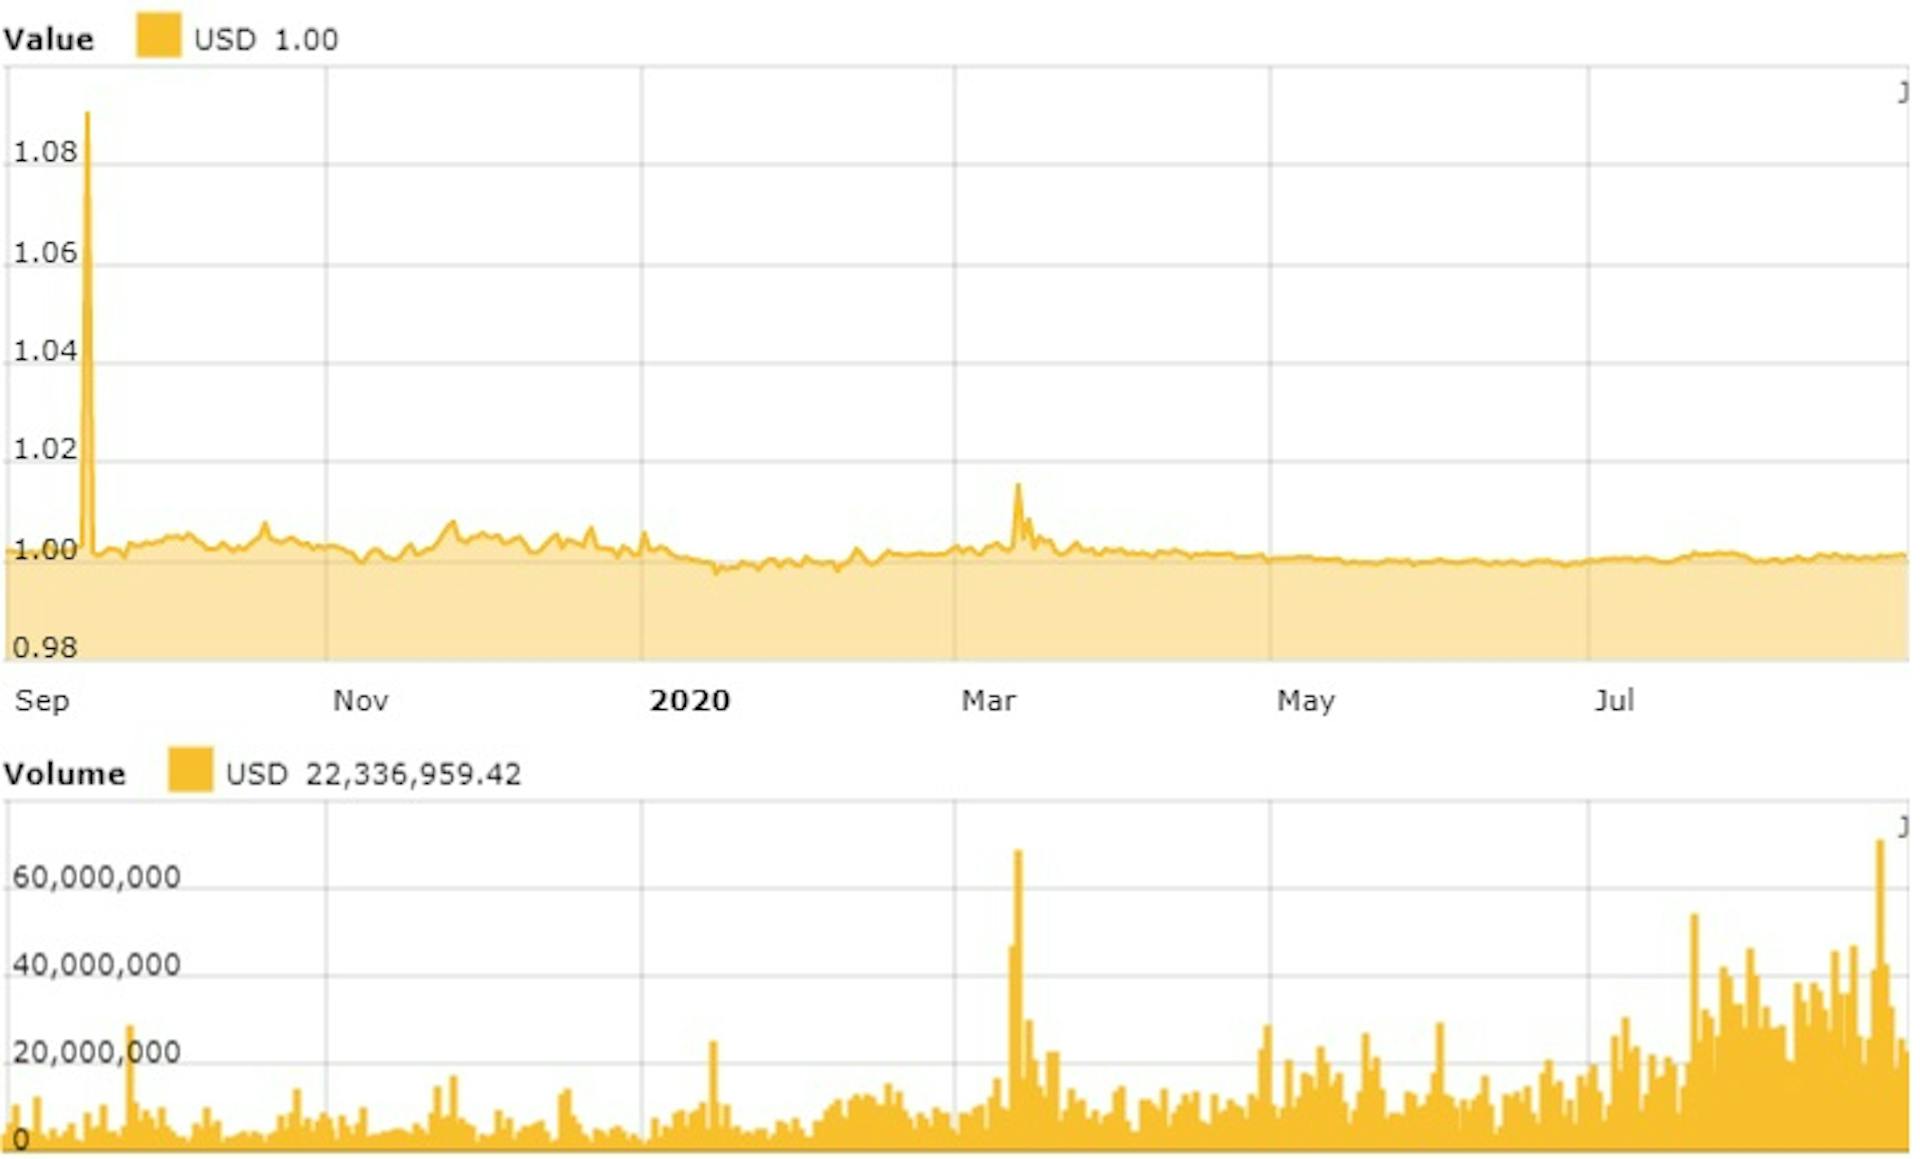 Tether Price and Volume Chart, August 2019 to August 2020. Source: Coin Telegraph